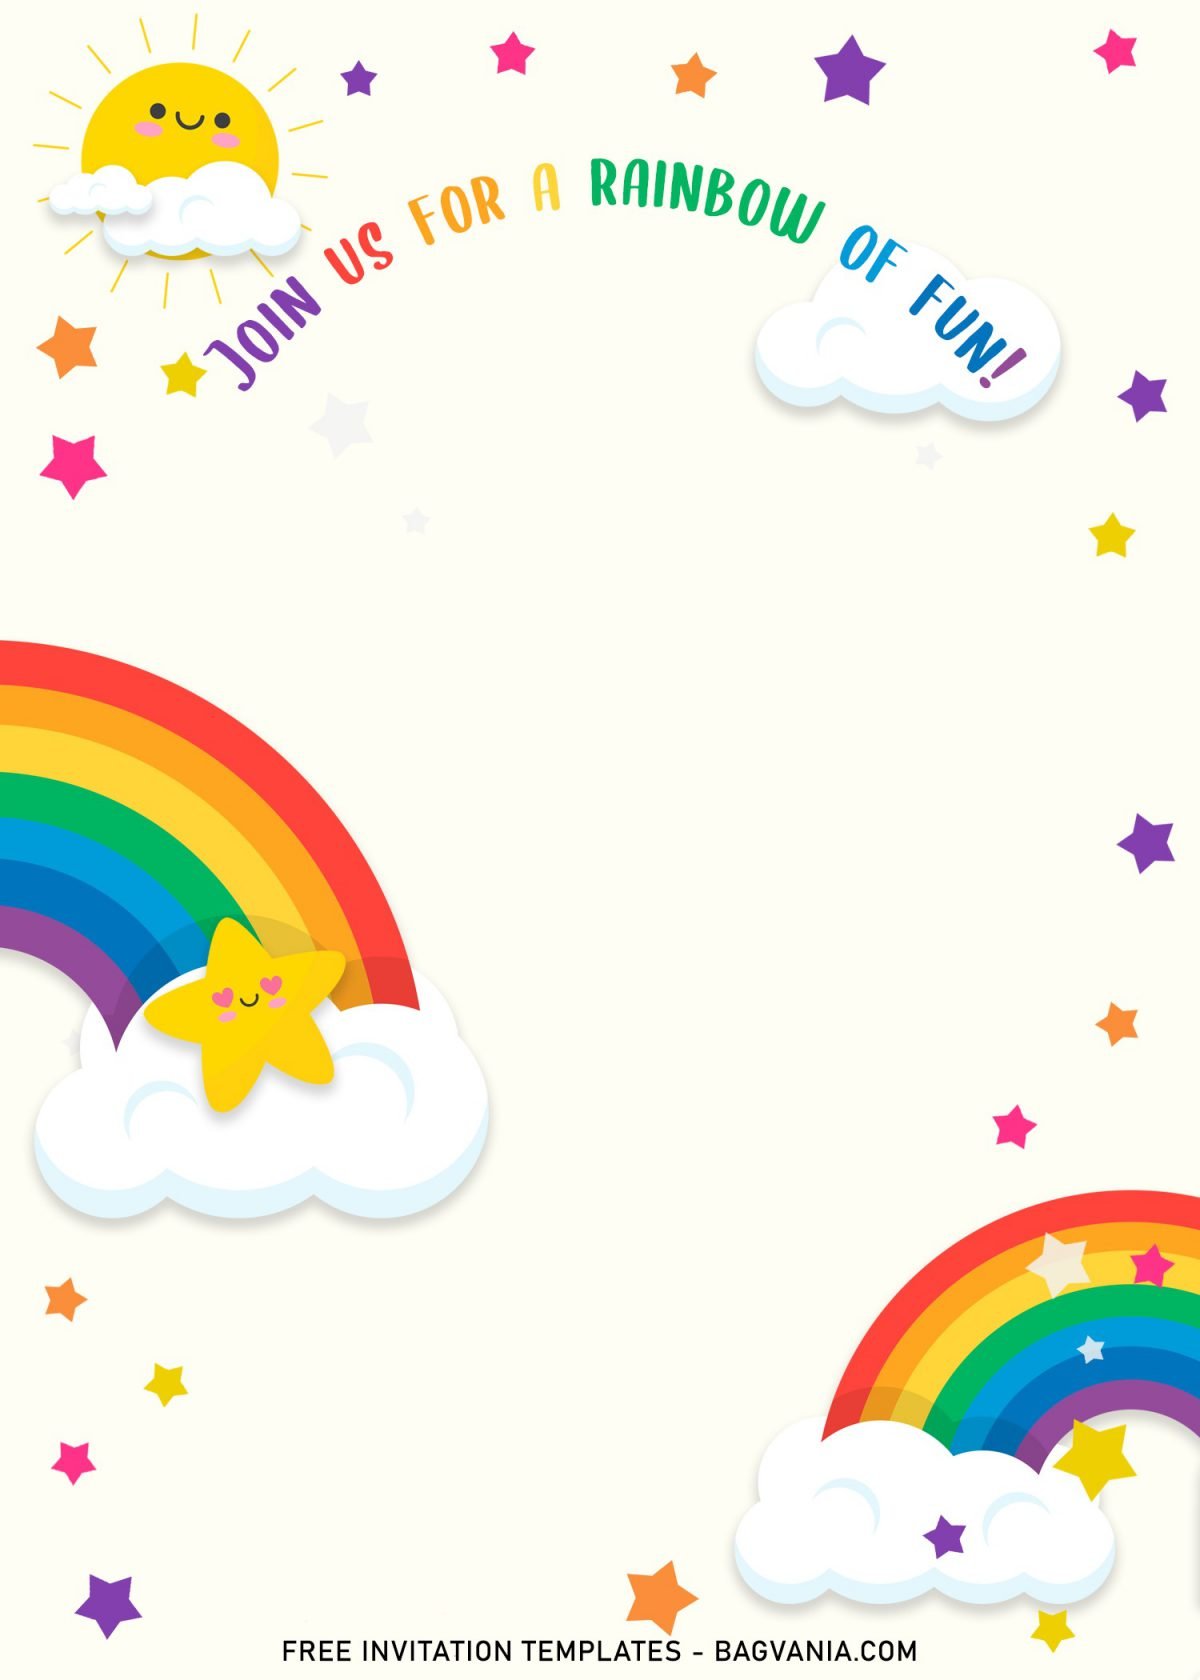 9+ Colorful Rainbow Invitation Card Templates For A Whimsical Birthday Party and has solid white colored background